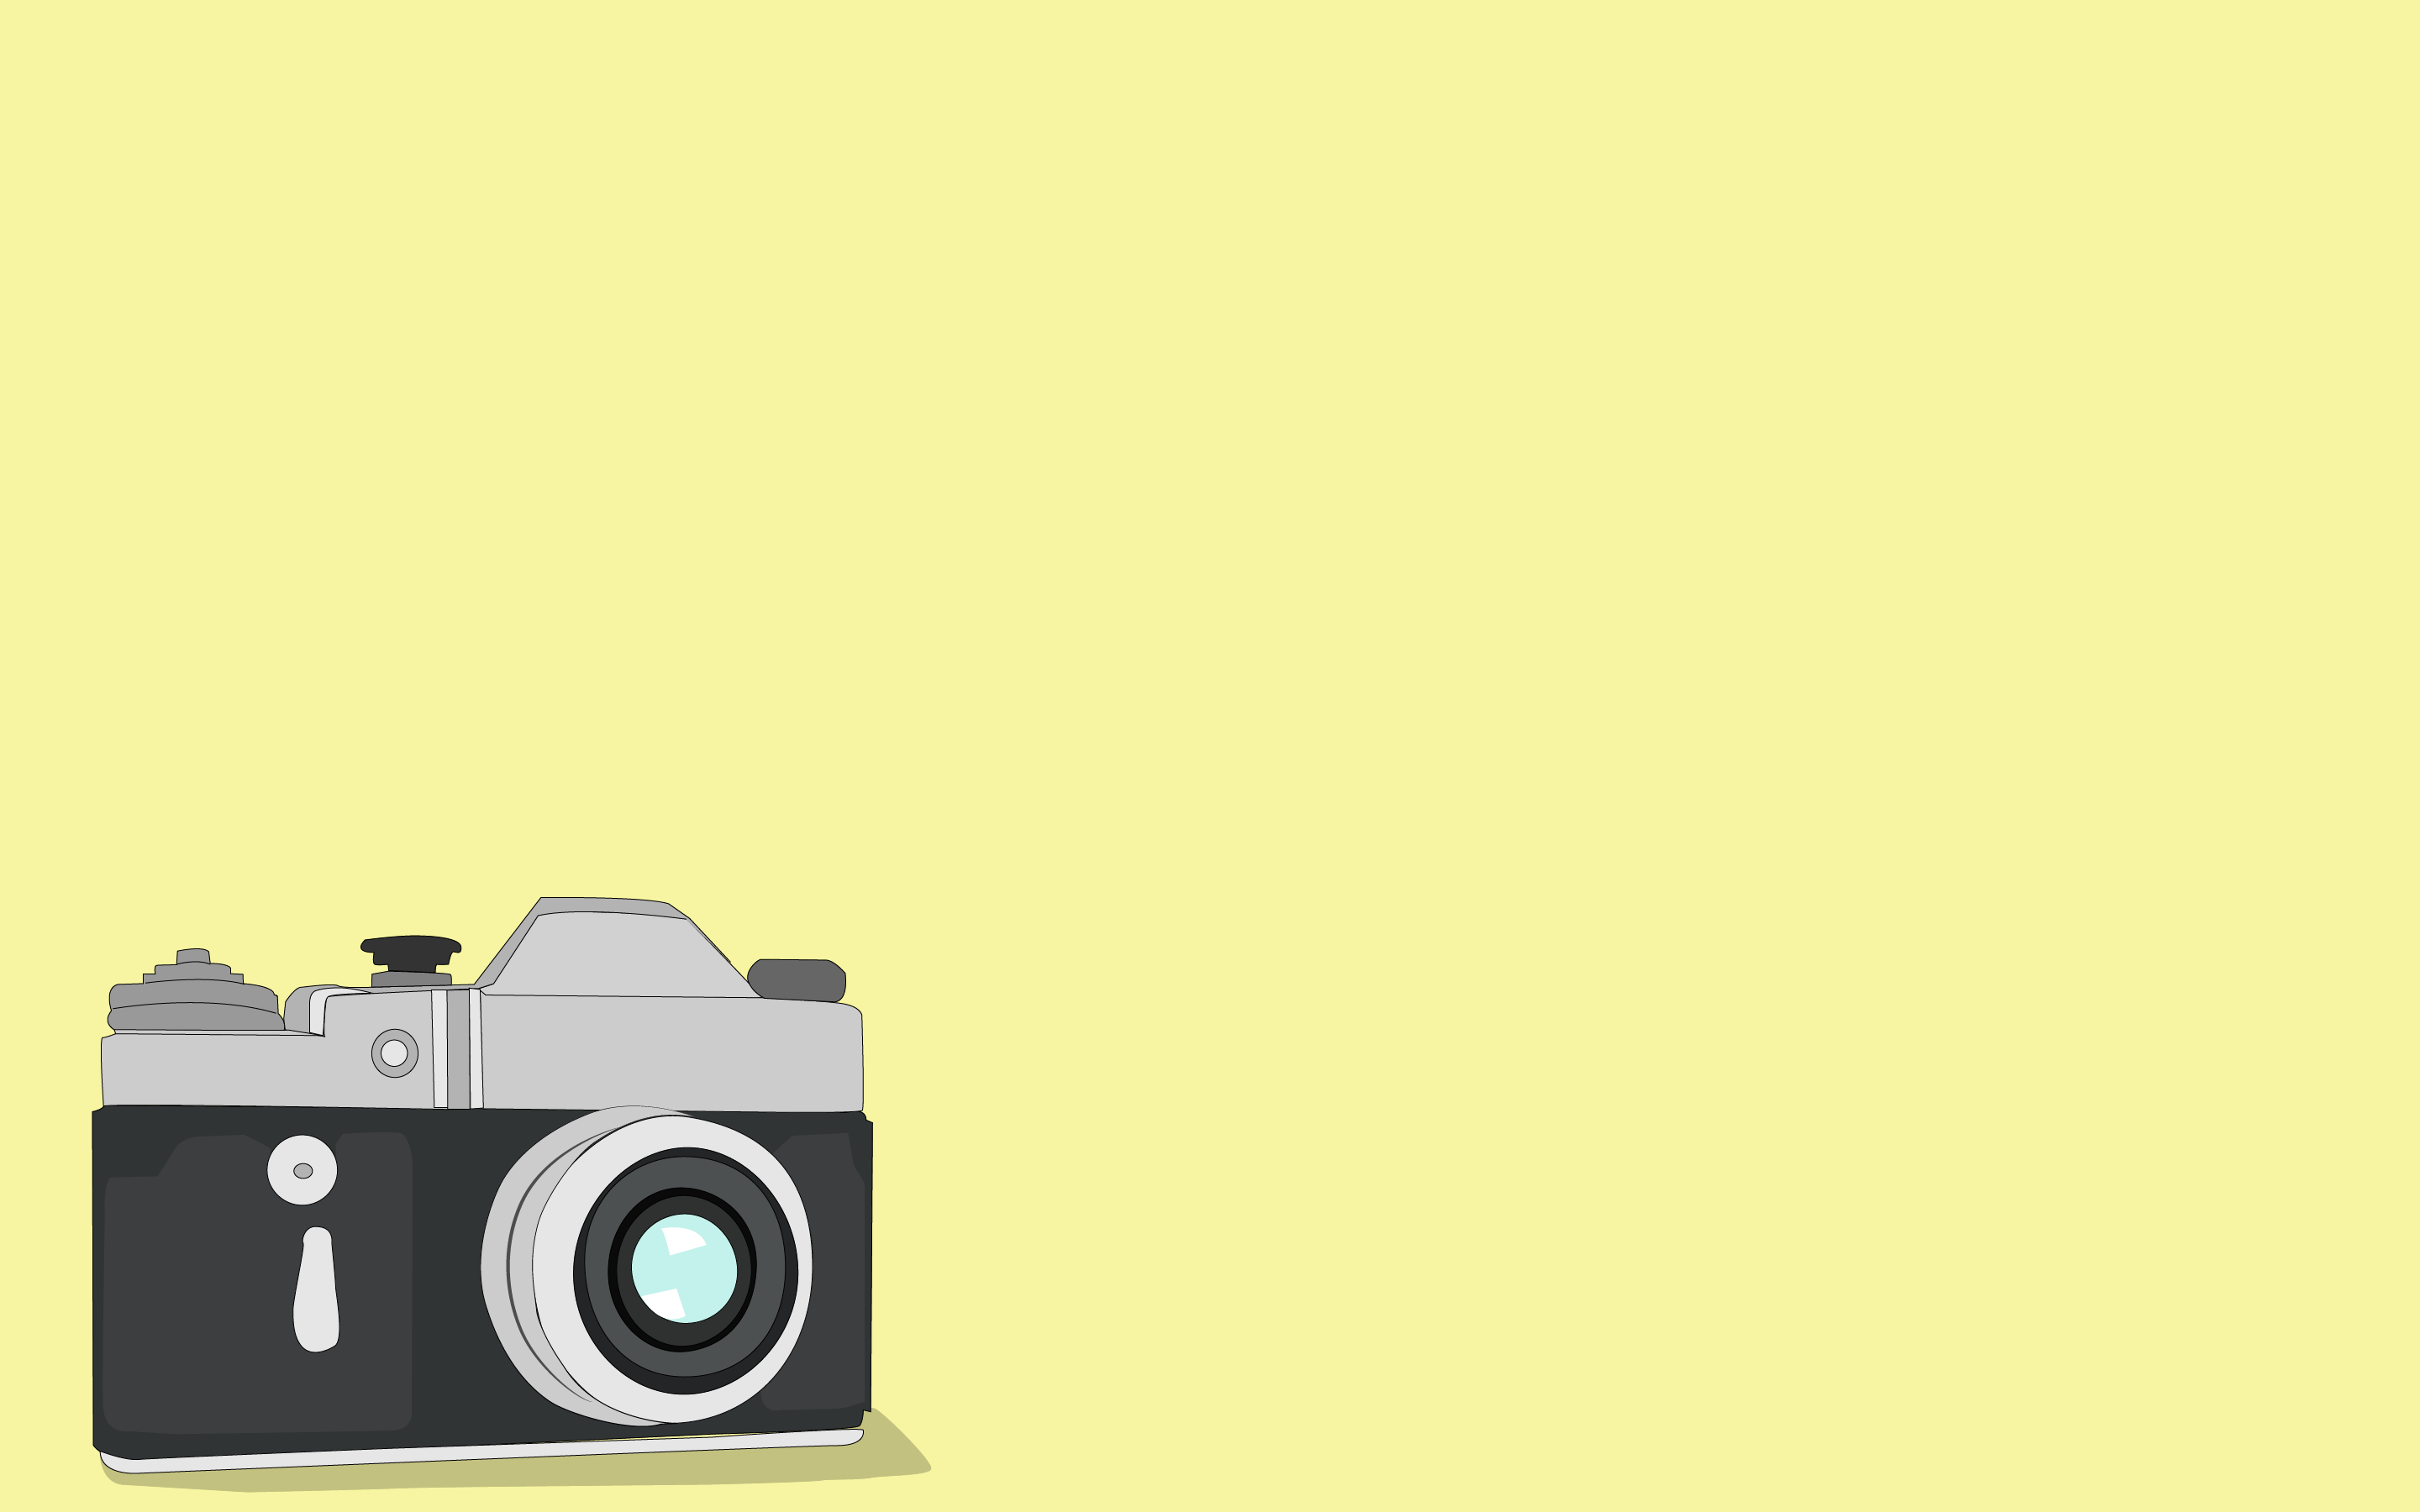 Camera Lens Photos Download The BEST Free Camera Lens Stock Photos  HD  Images